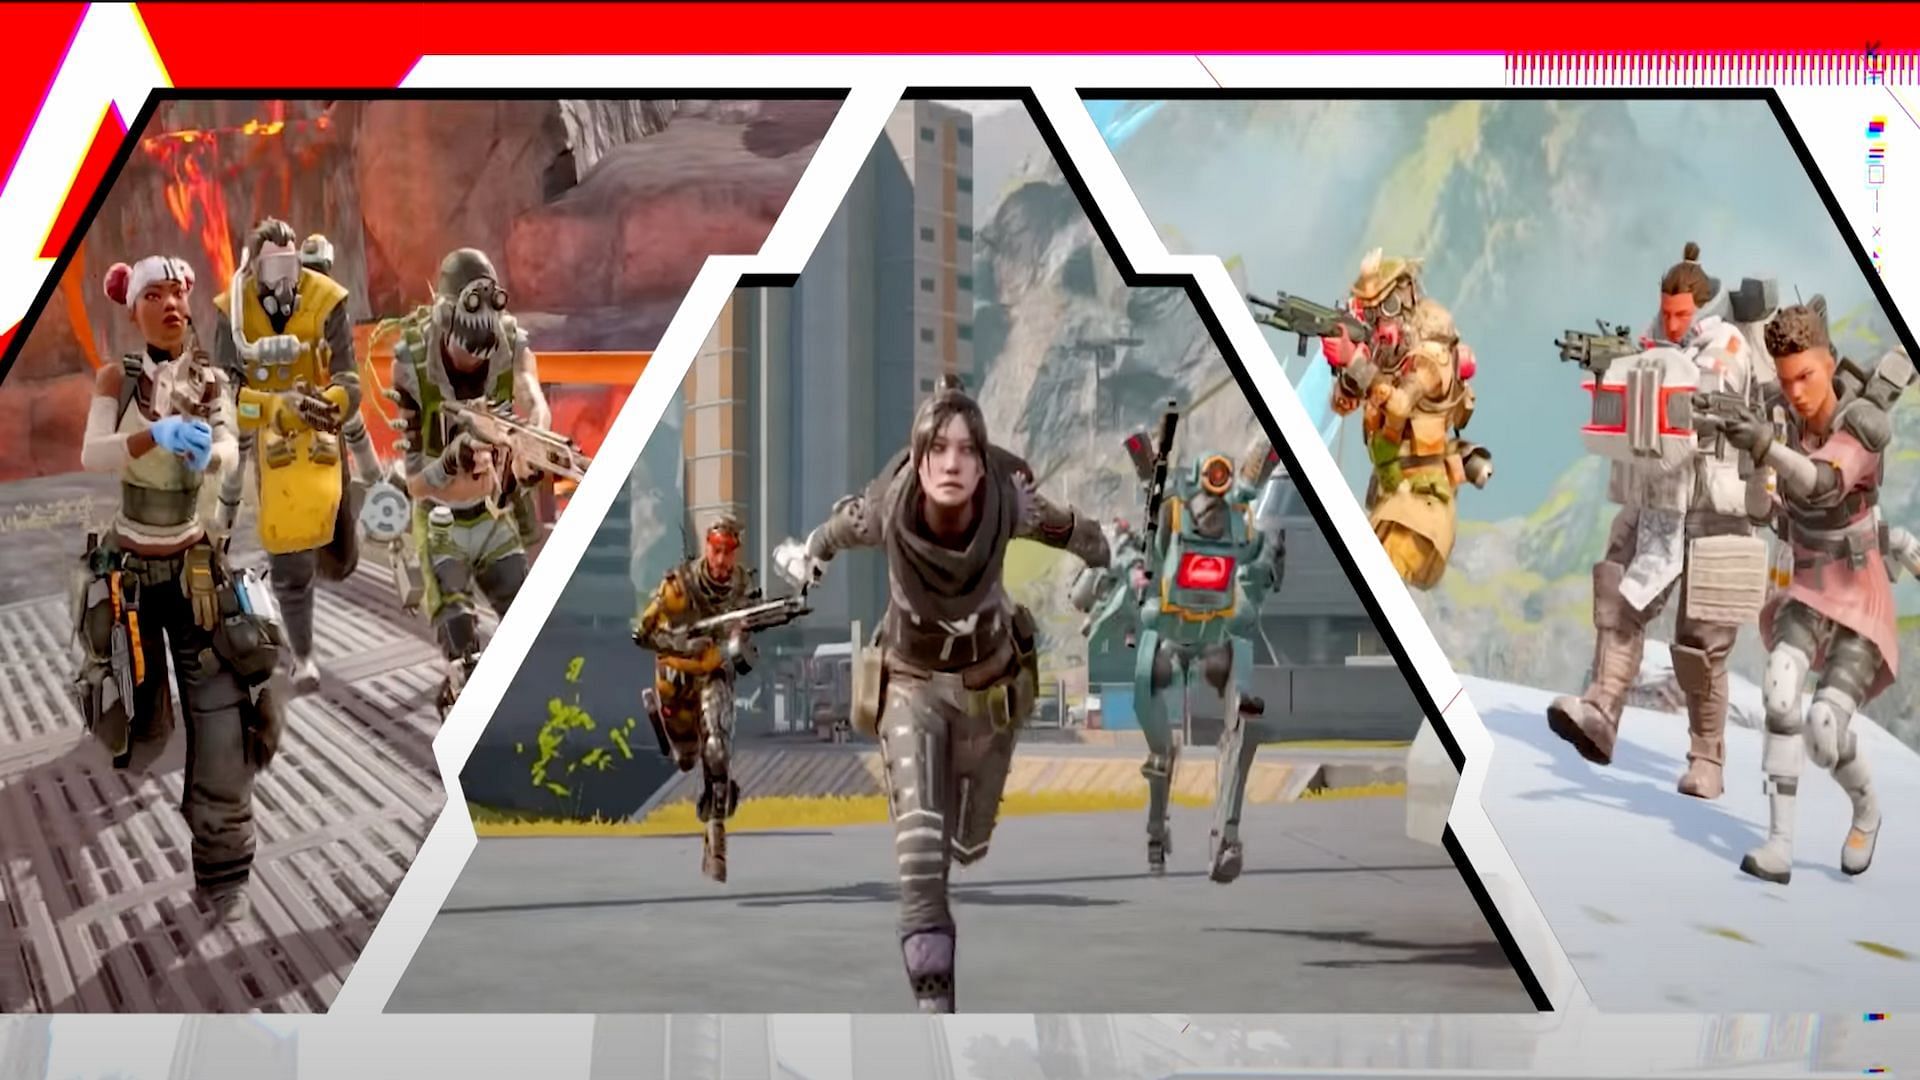 Players of Apex Legends Mobile can participate in ranked mode (Image via Respawn Entertainment)